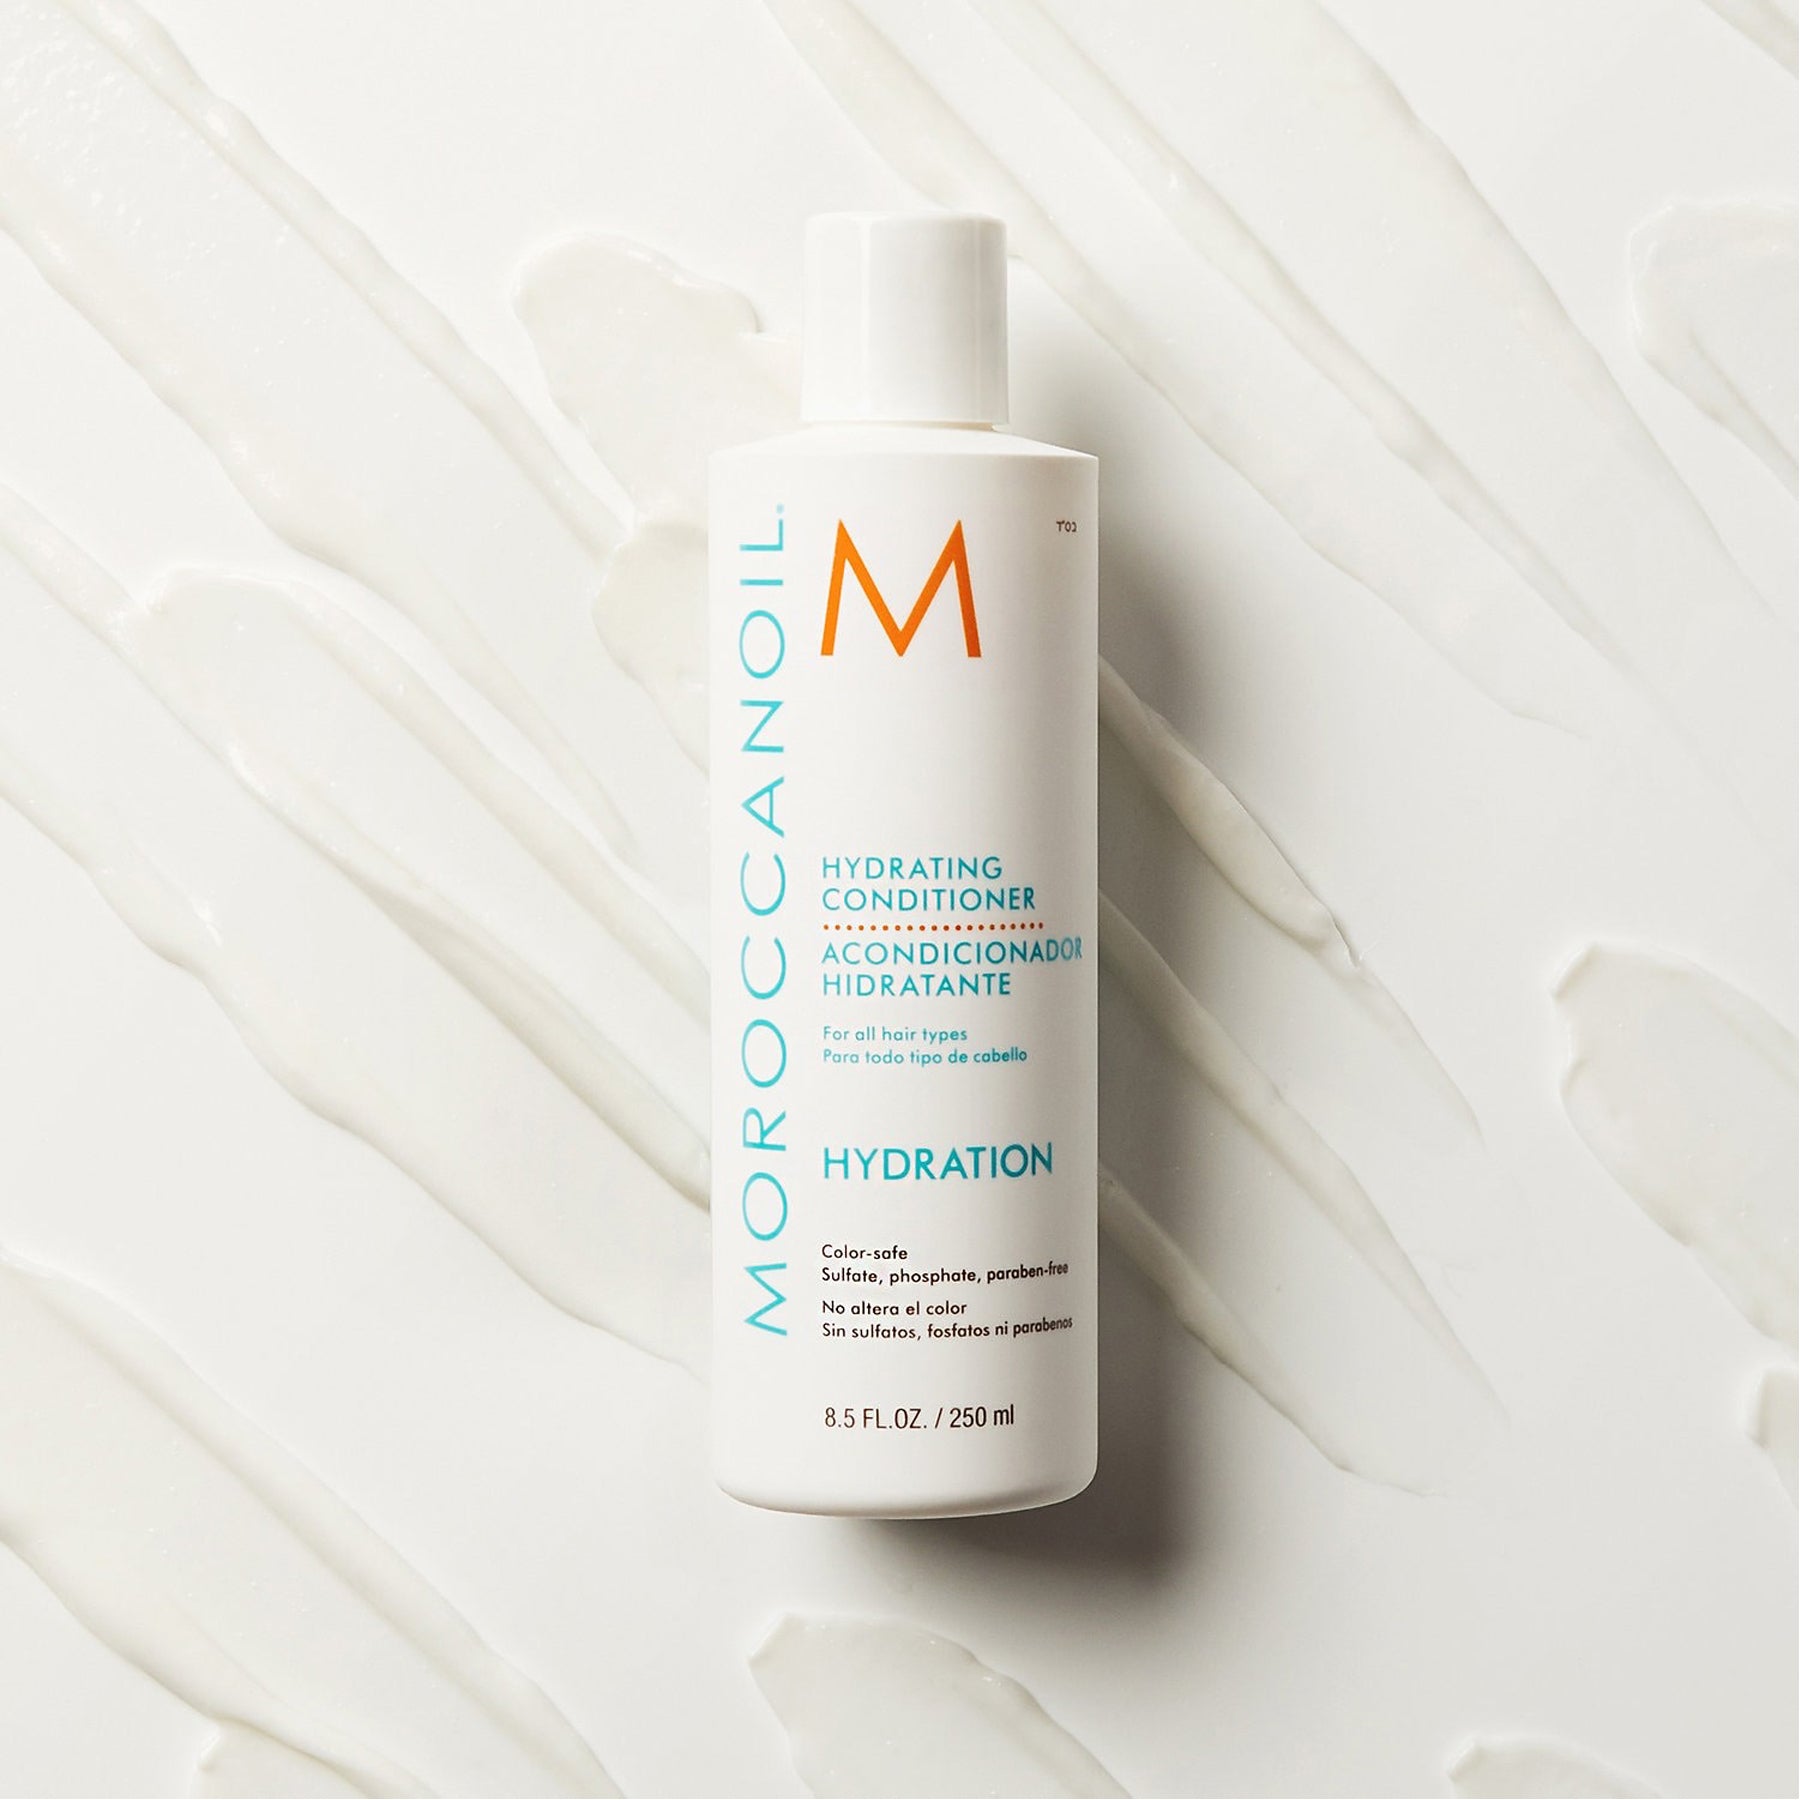 Moroccanoil Hydrating Conditioner, 8.5 Fluid Ounces / 250 Milliliters.